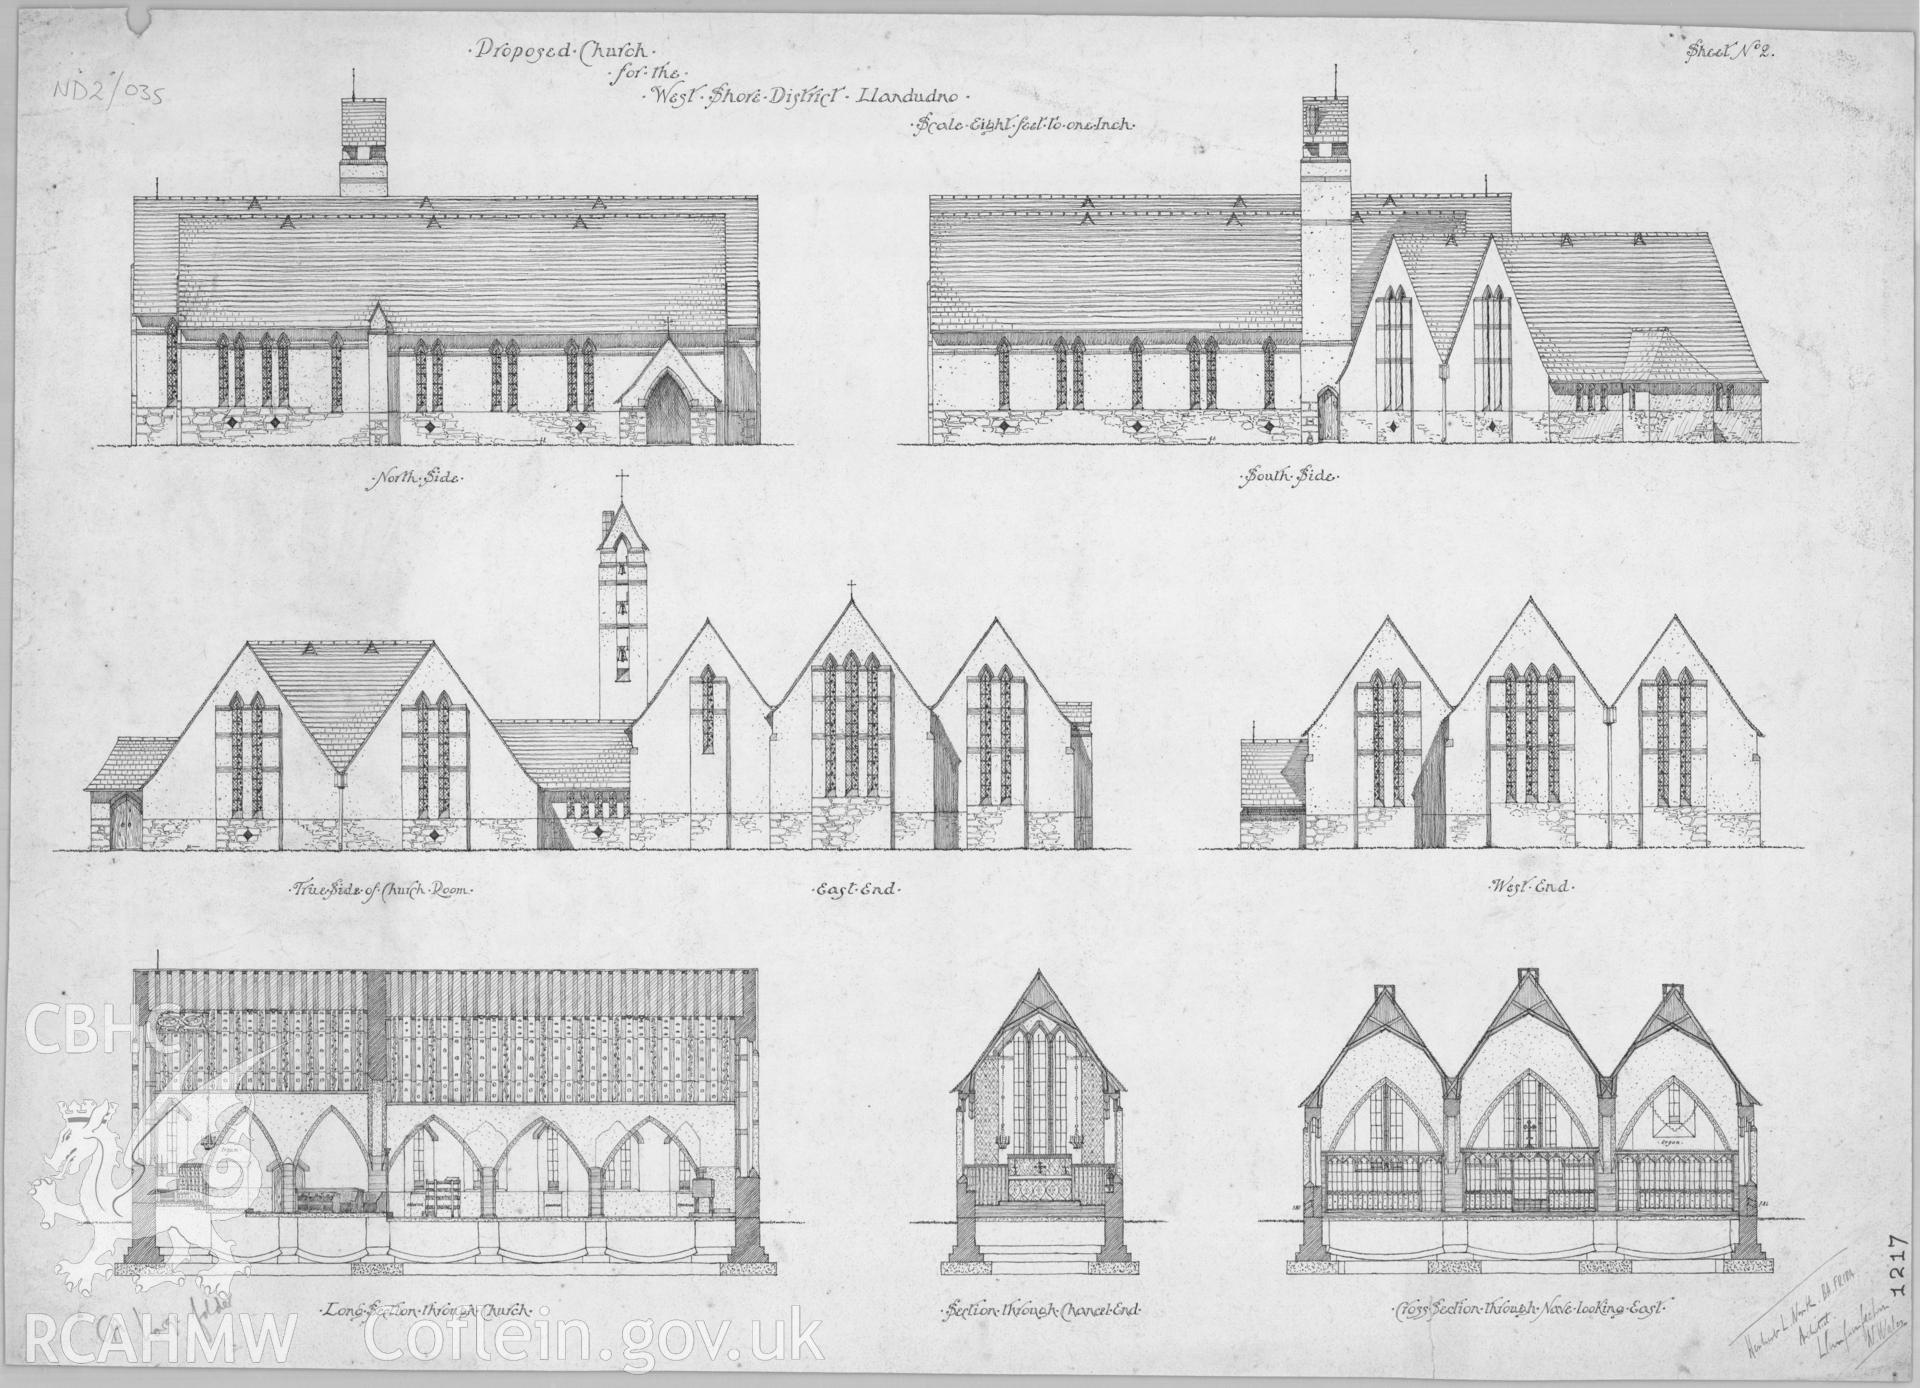 Elevations and sections of a proposed design for a church for the West Shore district of Llandudno (Our Saviour's Church), pen on paper, scale eight feet to one inch. The plan was submitted by North as an entry for an architectural competiton to design the church, but was unsuccessful. Our Saviour's Church is therefore built to a different design.